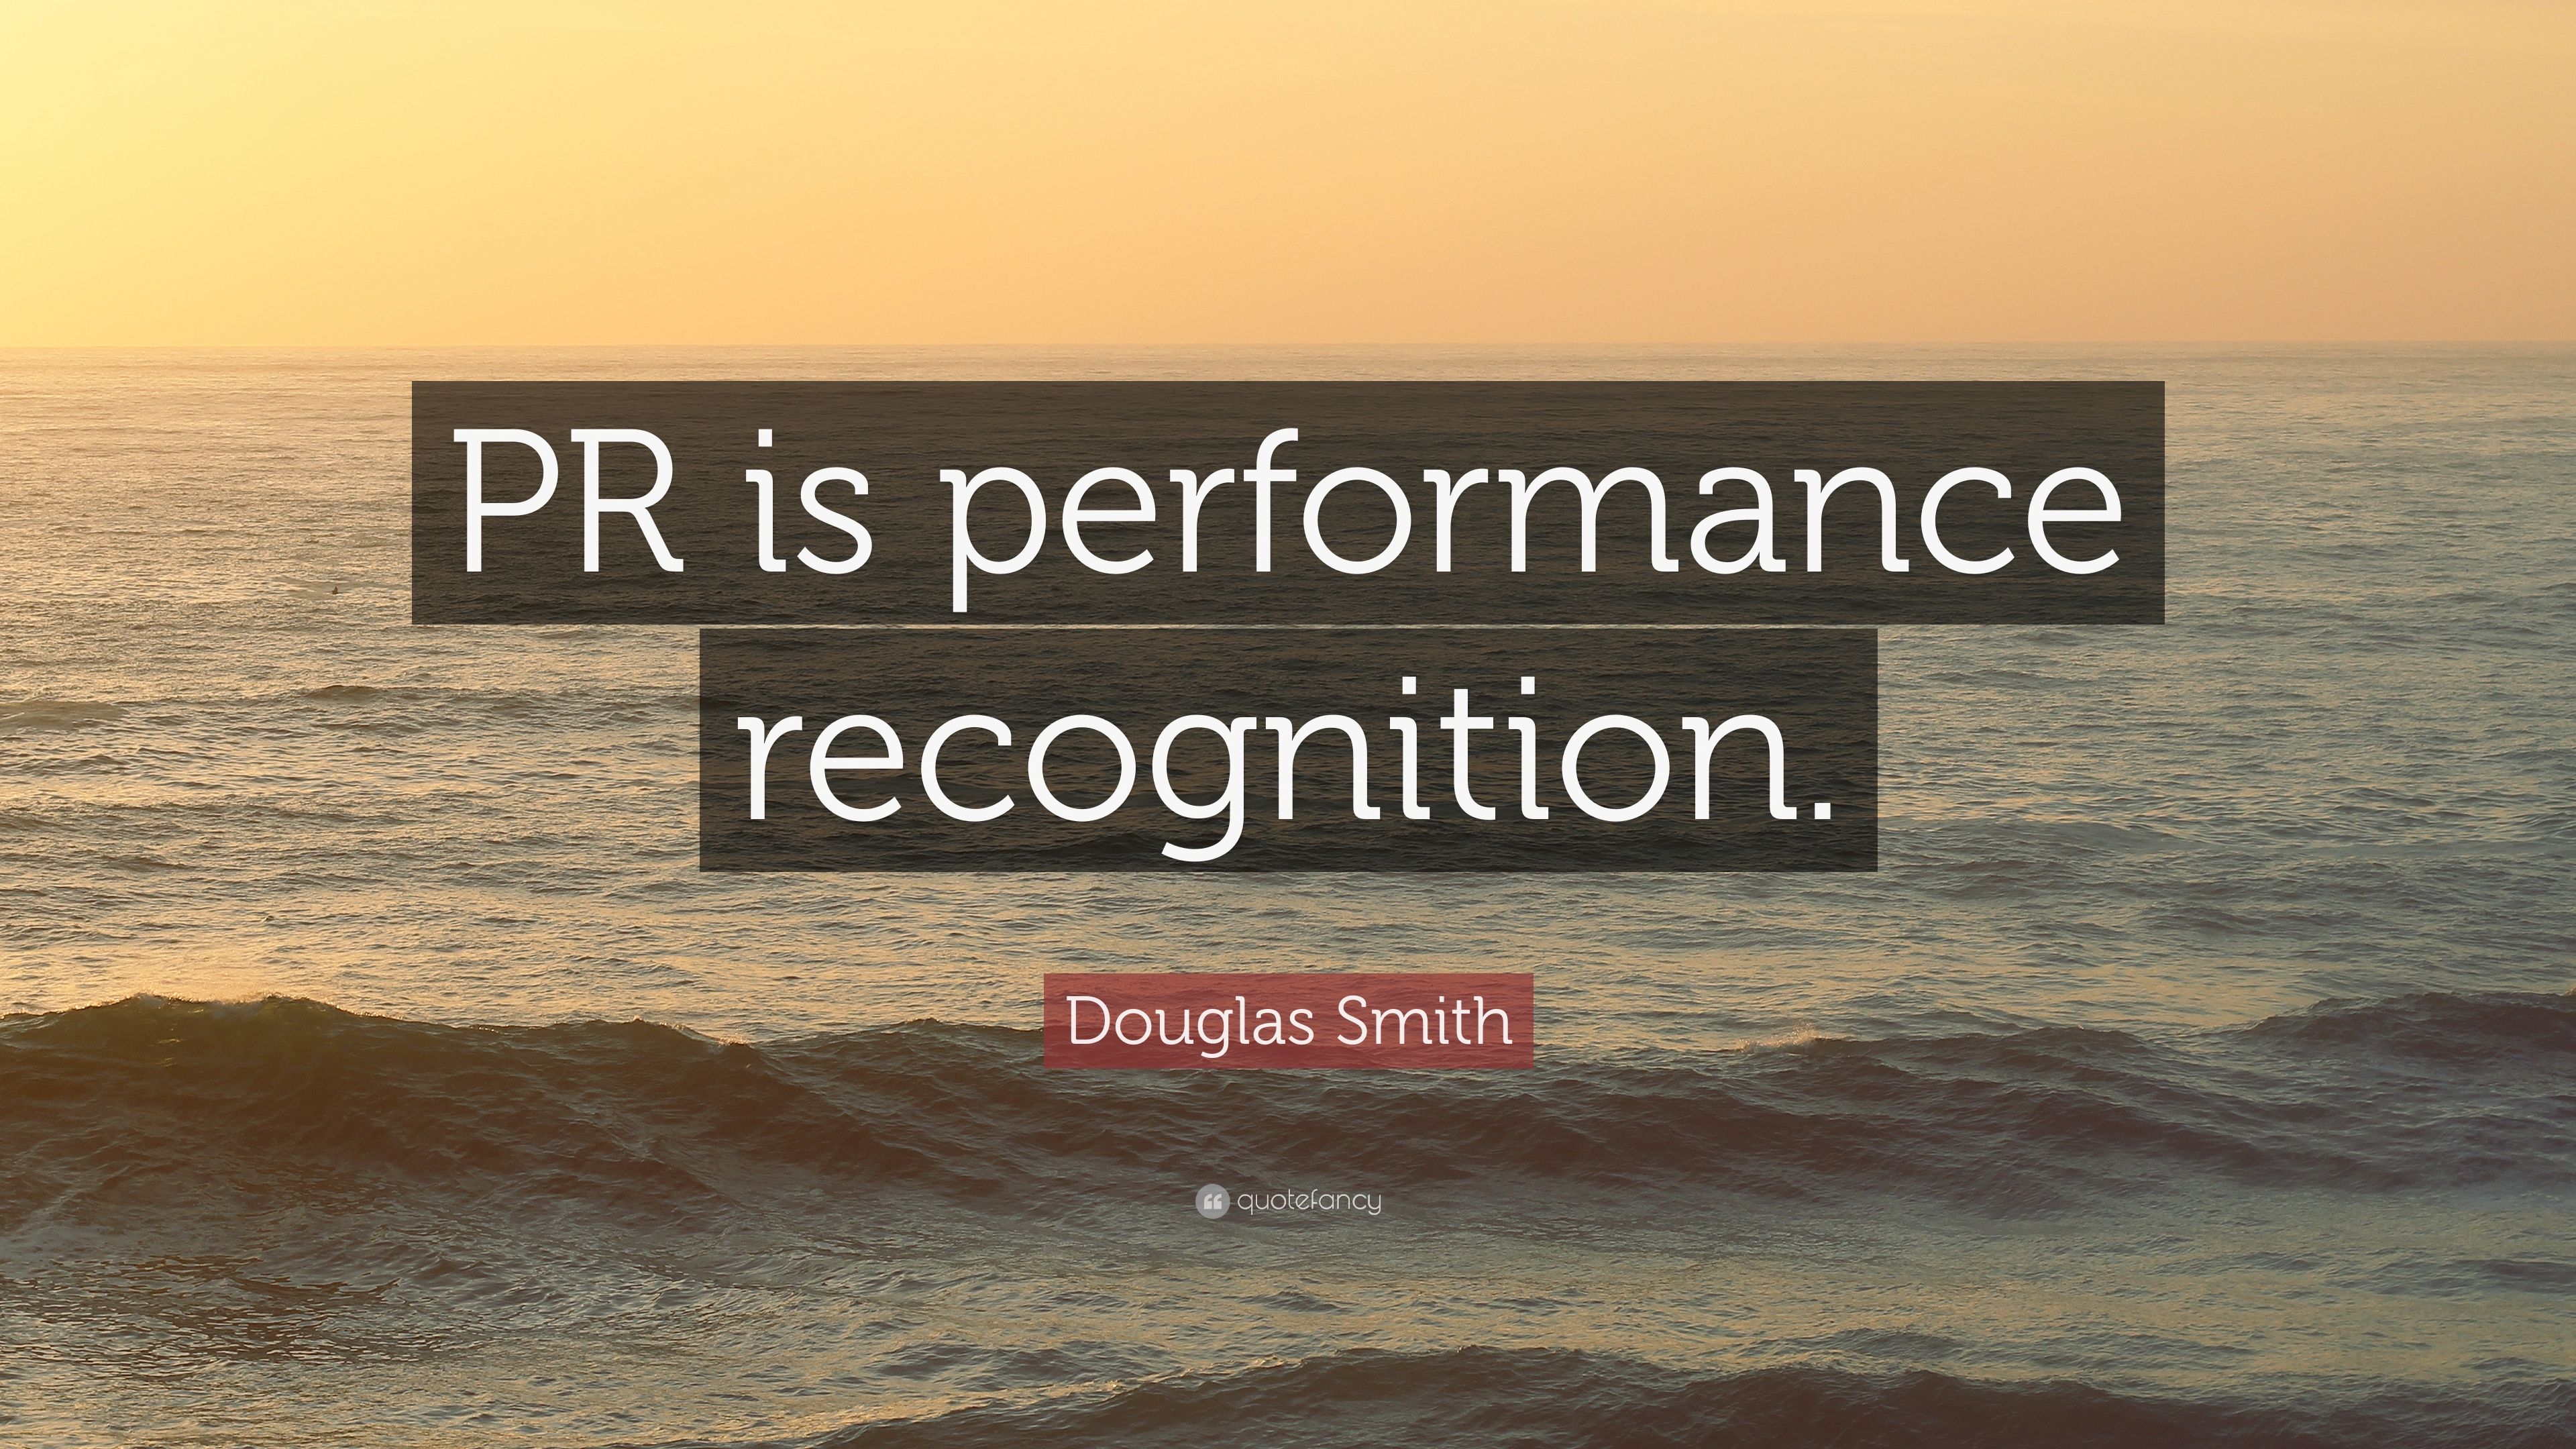 “PR is performance recognition”